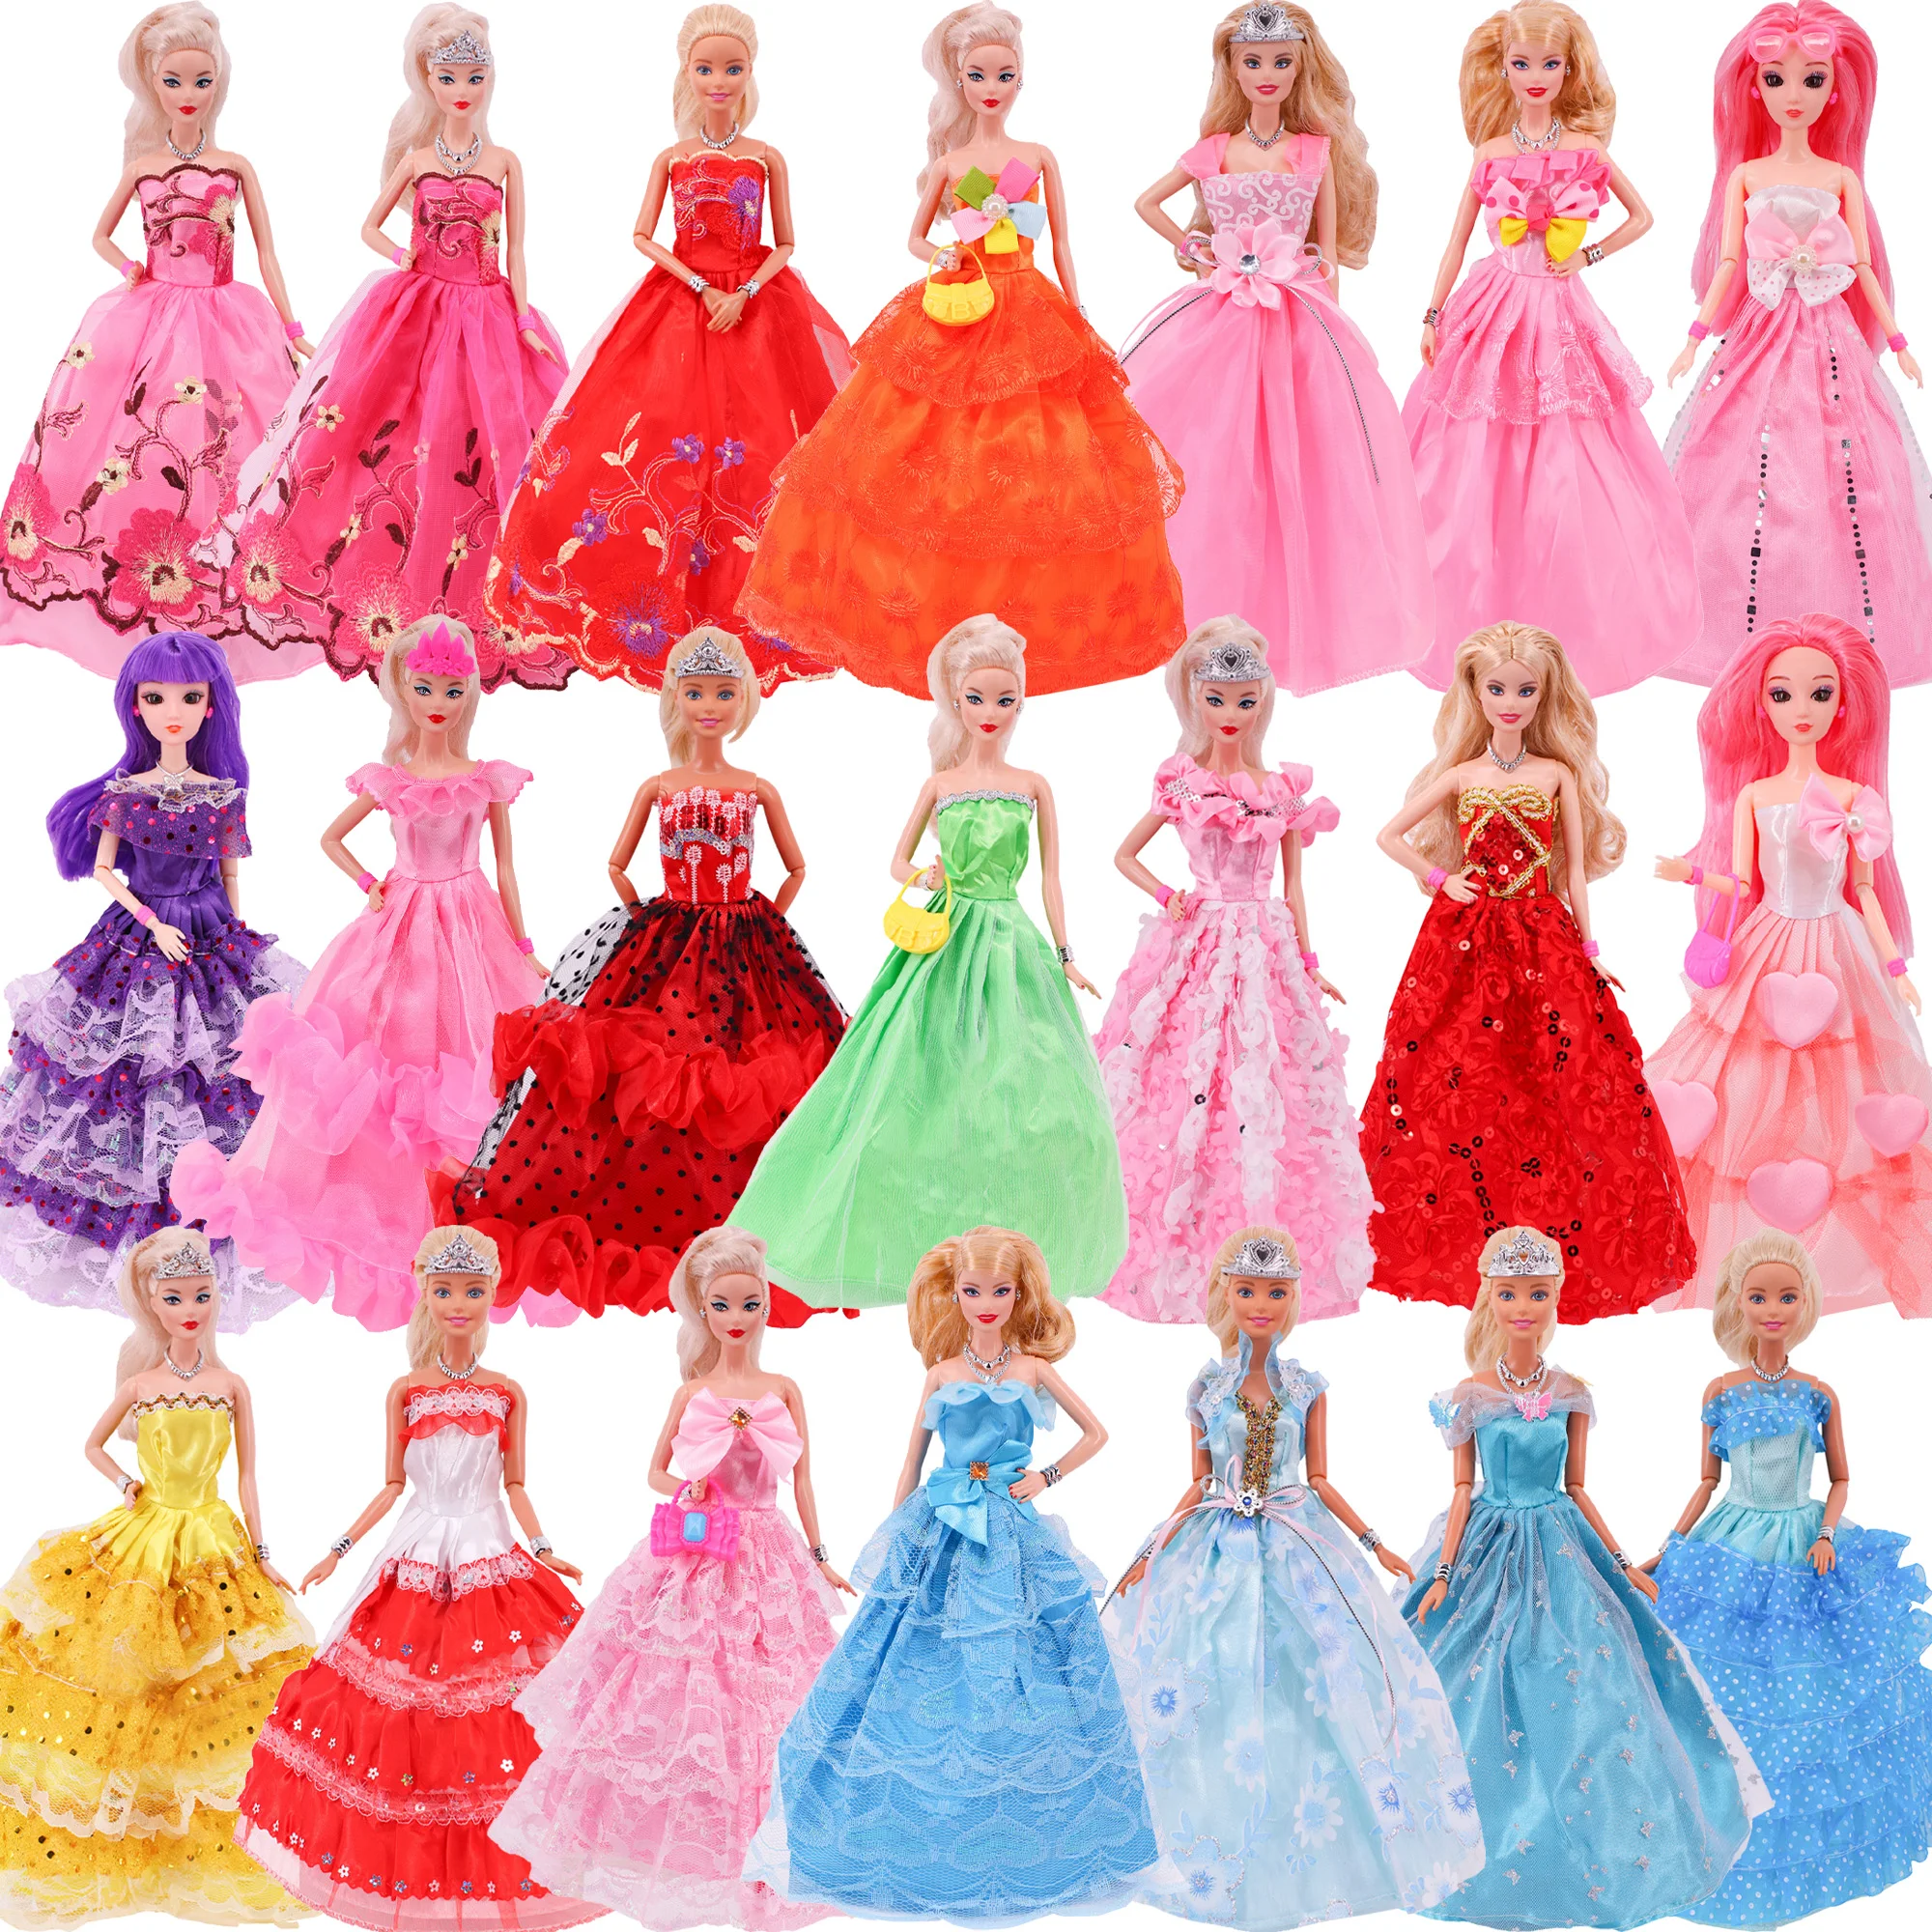 

Barbies Doll 1 Evening Dress+4 Piece Random Accessories For 11.5inch Barbies Doll Cocktail Daily Casual Clothing Accessories